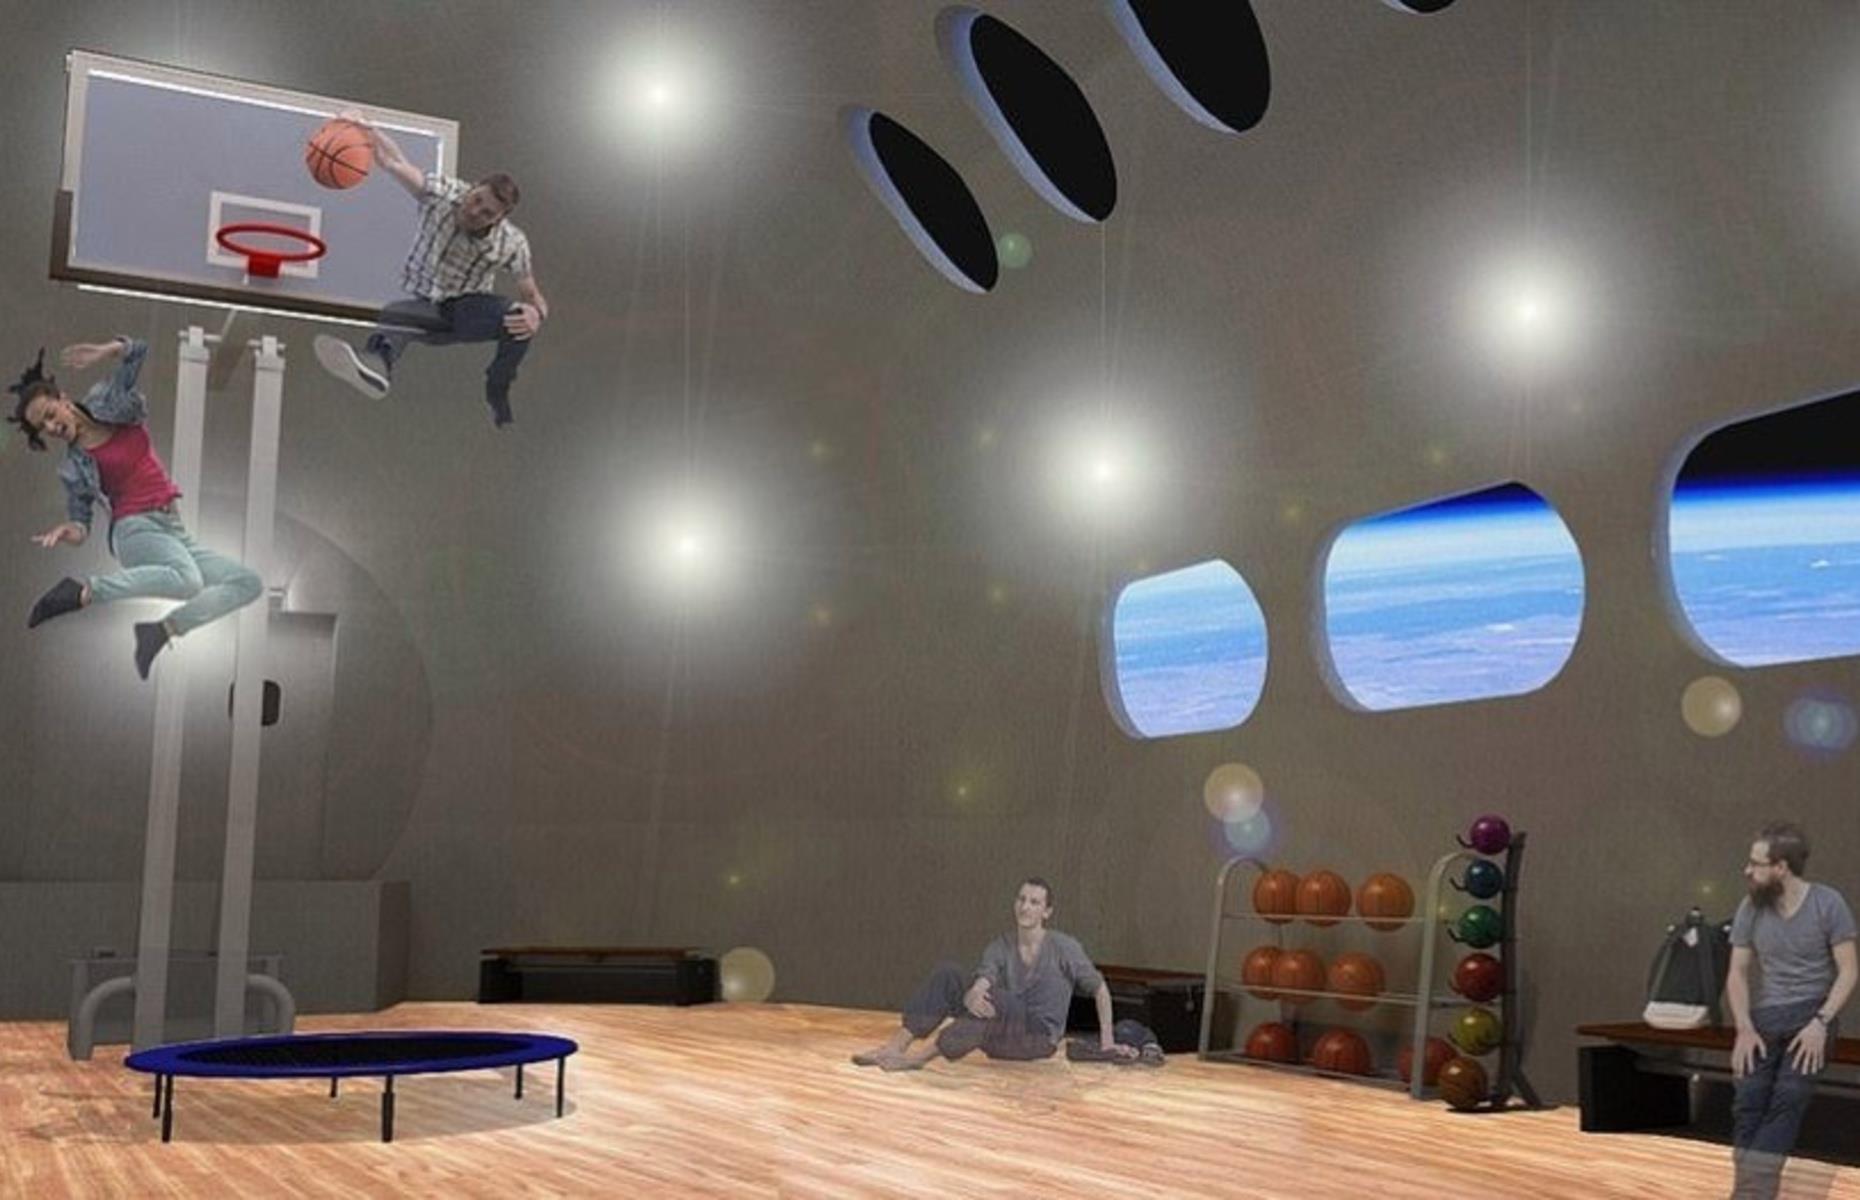 <p>Basketball anyone? That’s not the only activity you could soon be doing in space. The hotel’s activity and gym module will be open for sports by day, and it’ll transform into a concert venue by night.</p>  <p><strong><a href="https://www.loveexploring.com/galleries/111179/gamechanging-travel-innovations-we-cant-wait-to-enjoy">Take a look at more game-changing travel innovations</a></strong></p>